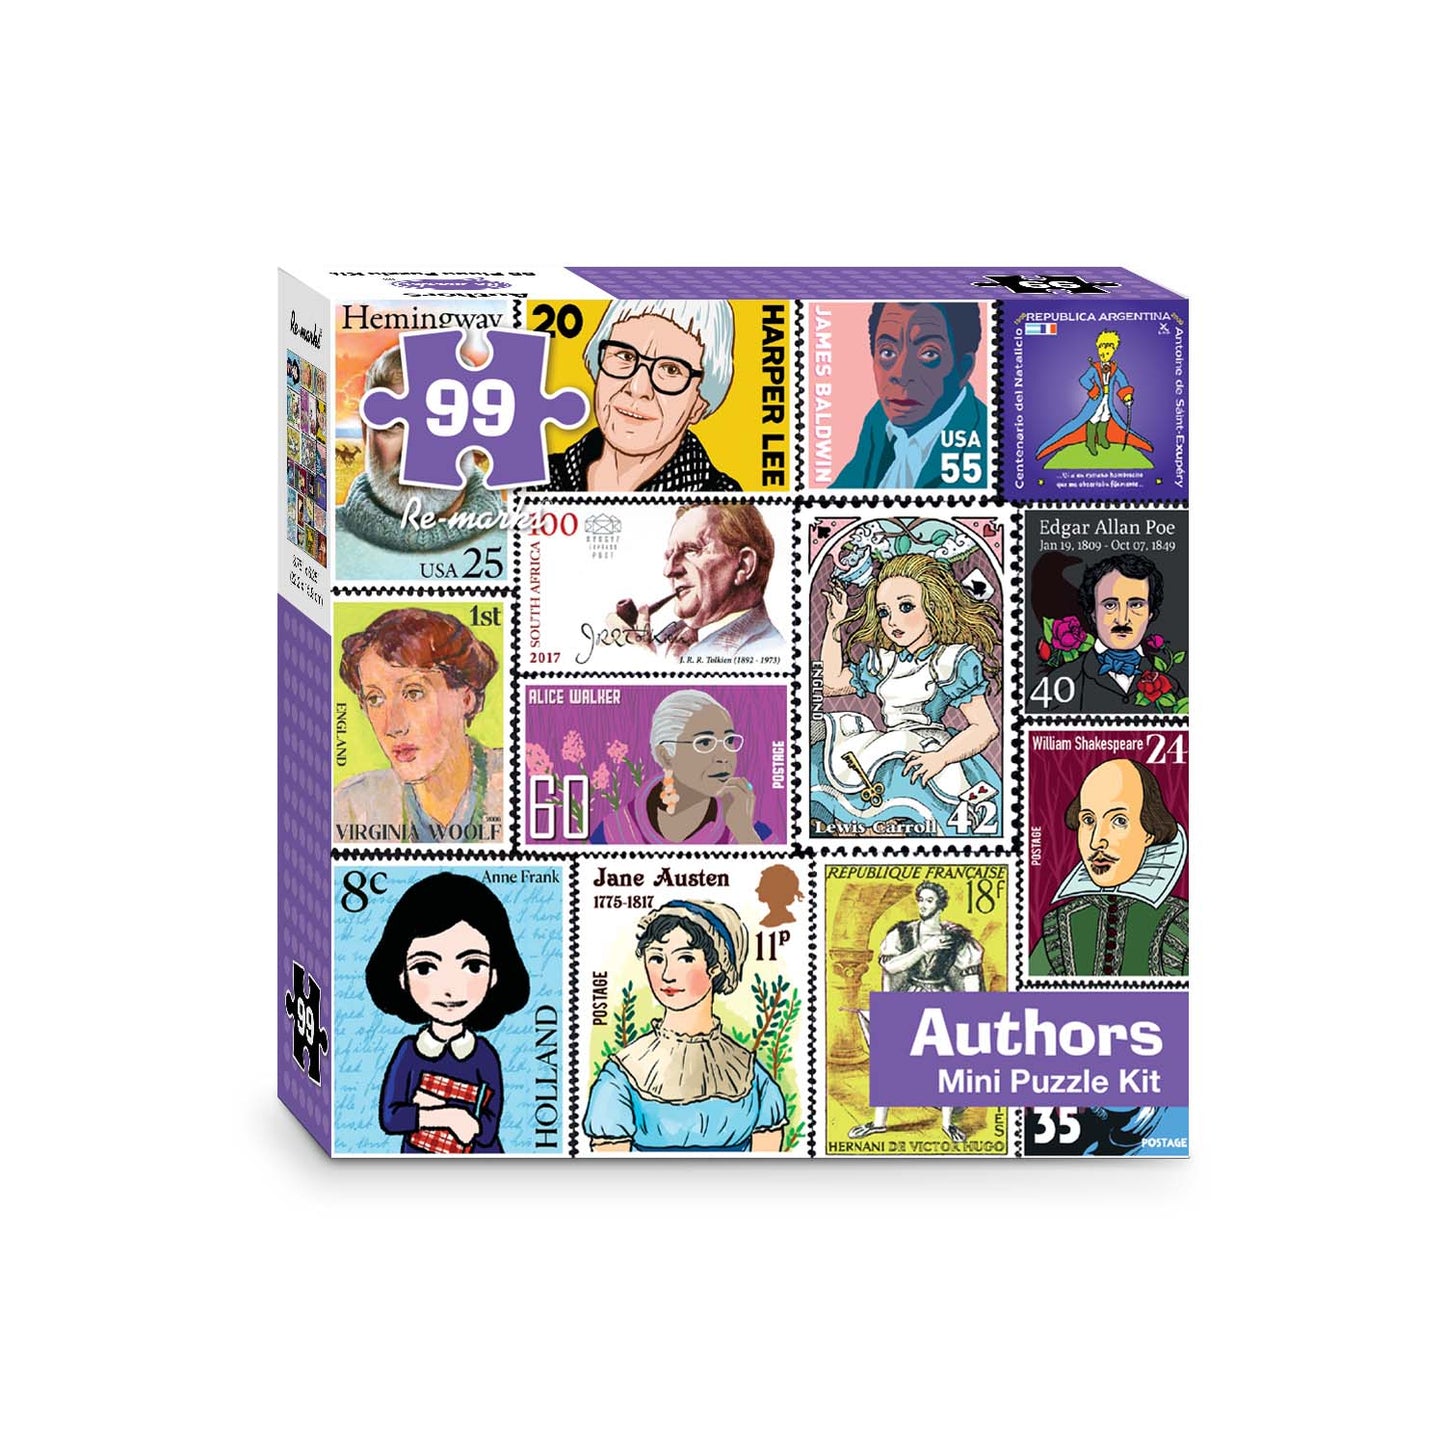 Authors Mini Puzzle Kit - 99-Piece Puzzle with Display Kit